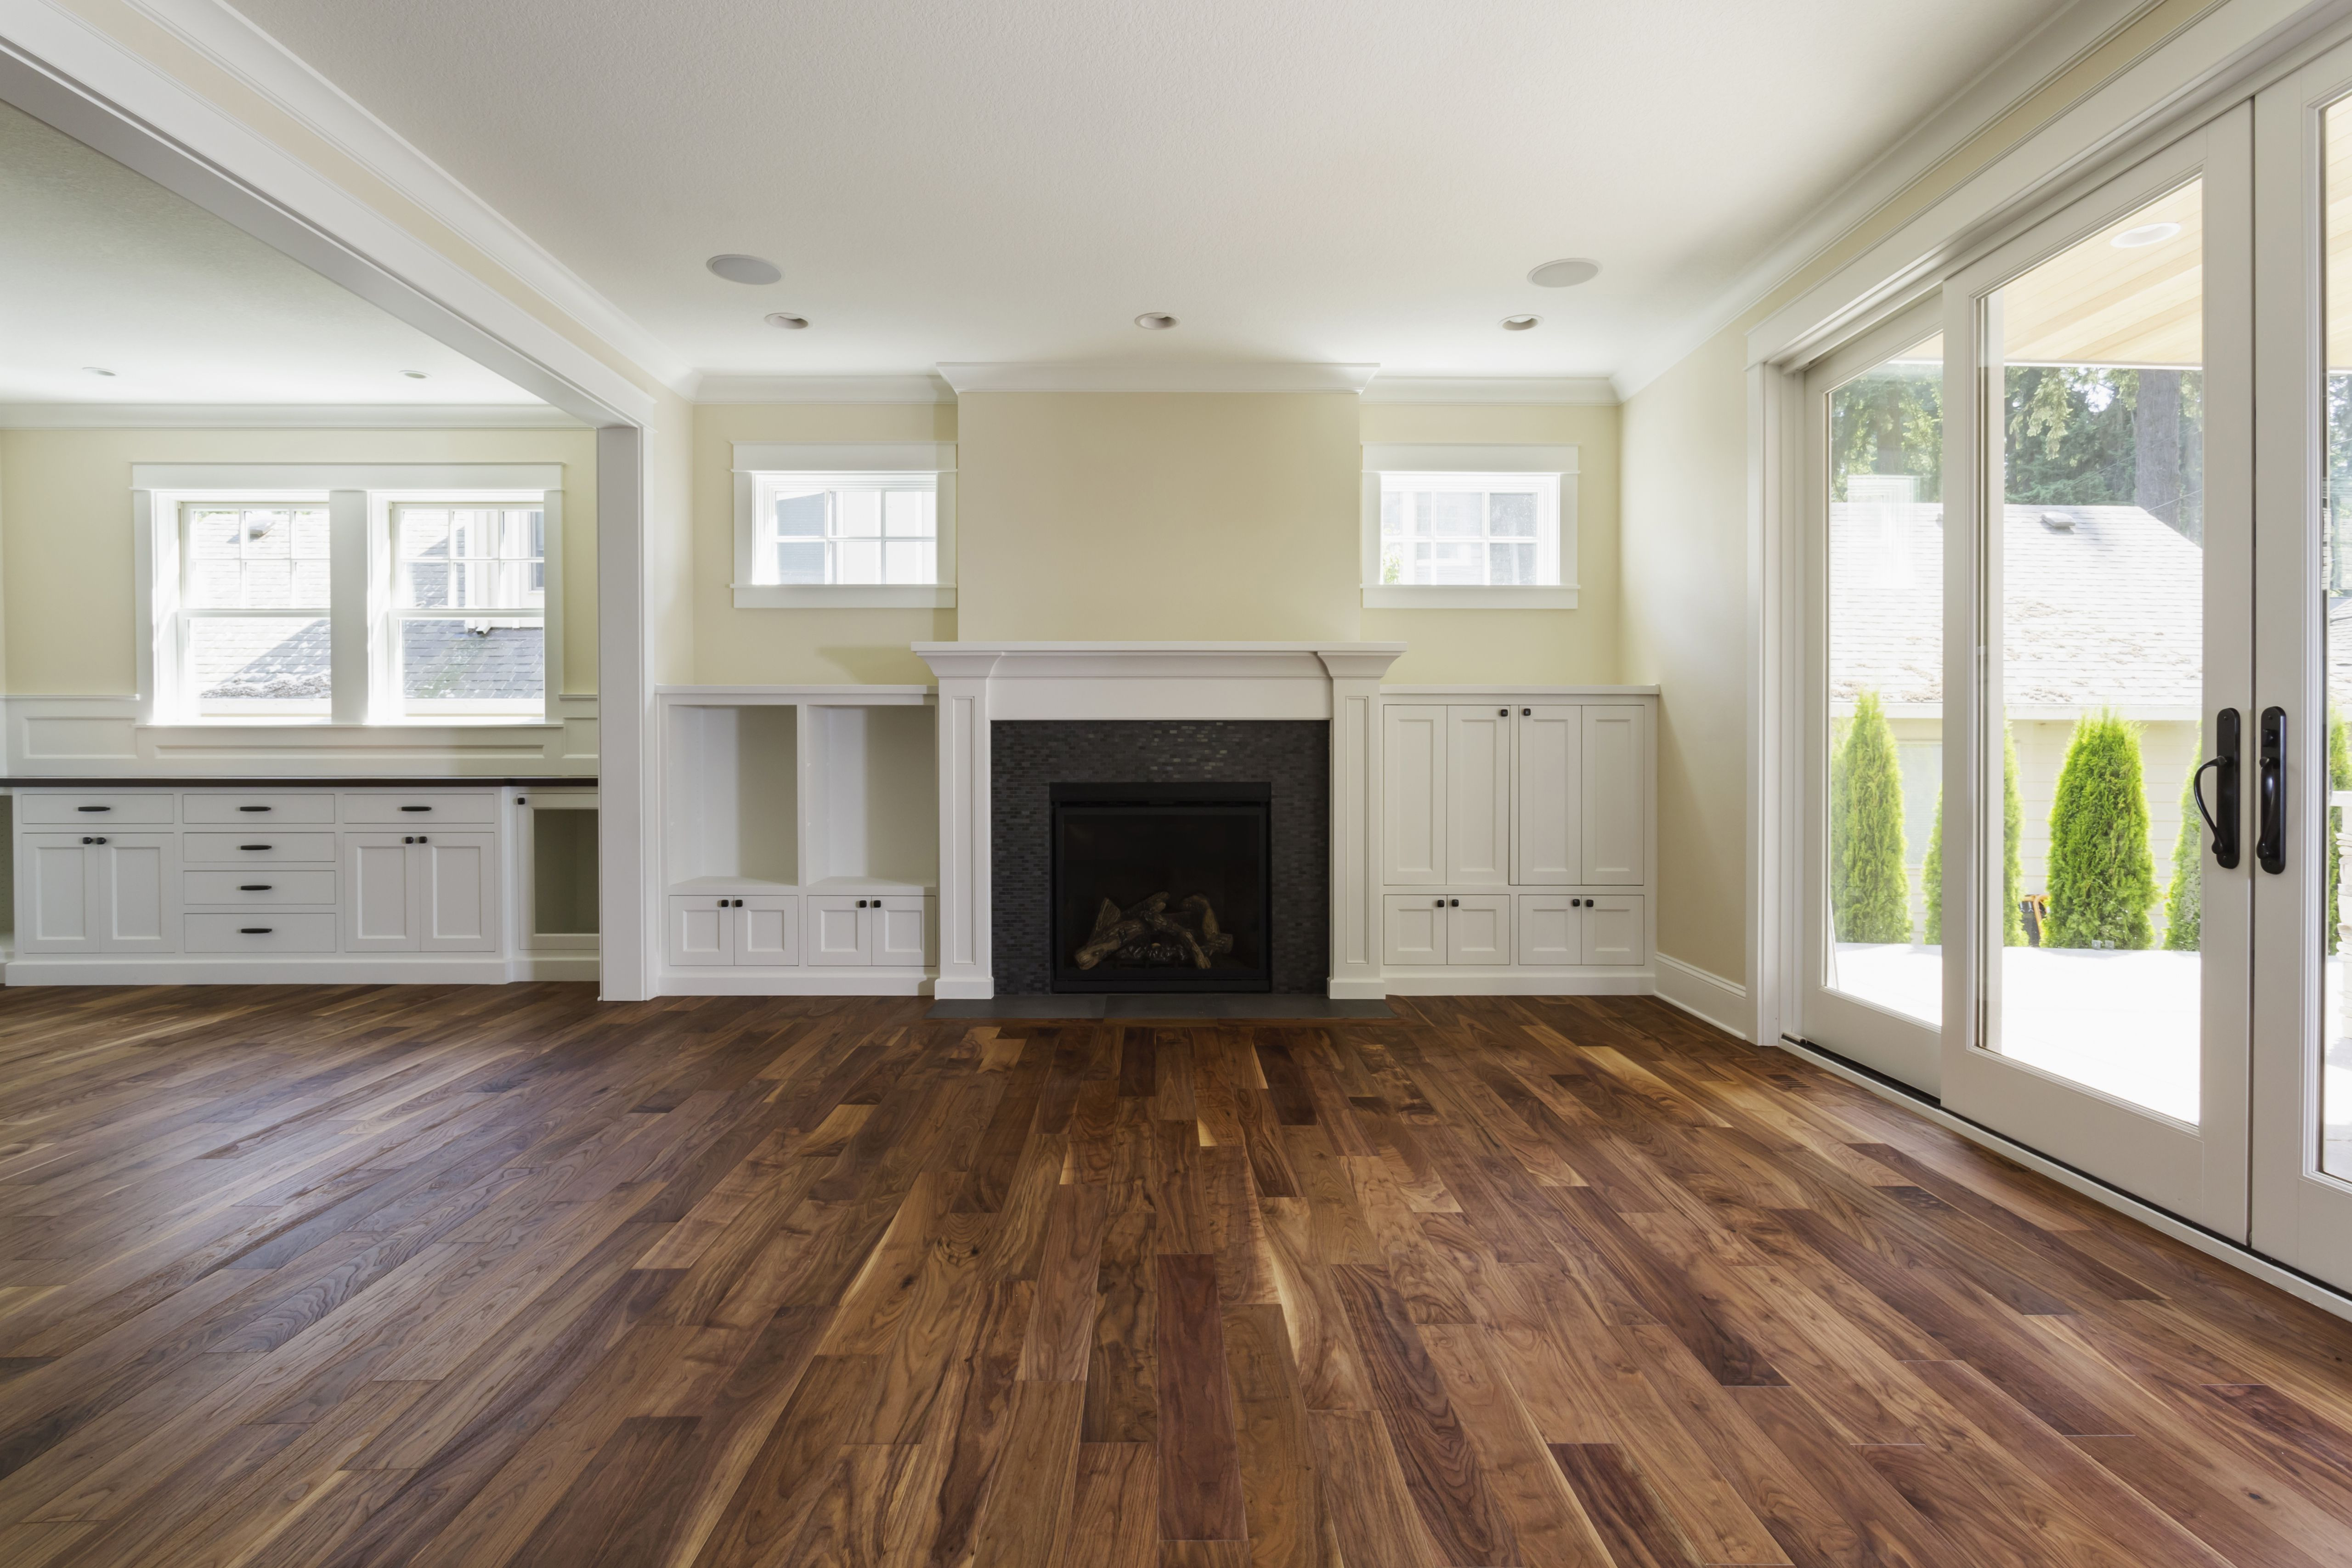 12 attractive No Wax Hardwood Floor Cleaner 2022 free download no wax hardwood floor cleaner of the pros and cons of prefinished hardwood flooring regarding fireplace and built in shelves in living room 482143011 57bef8e33df78cc16e035397